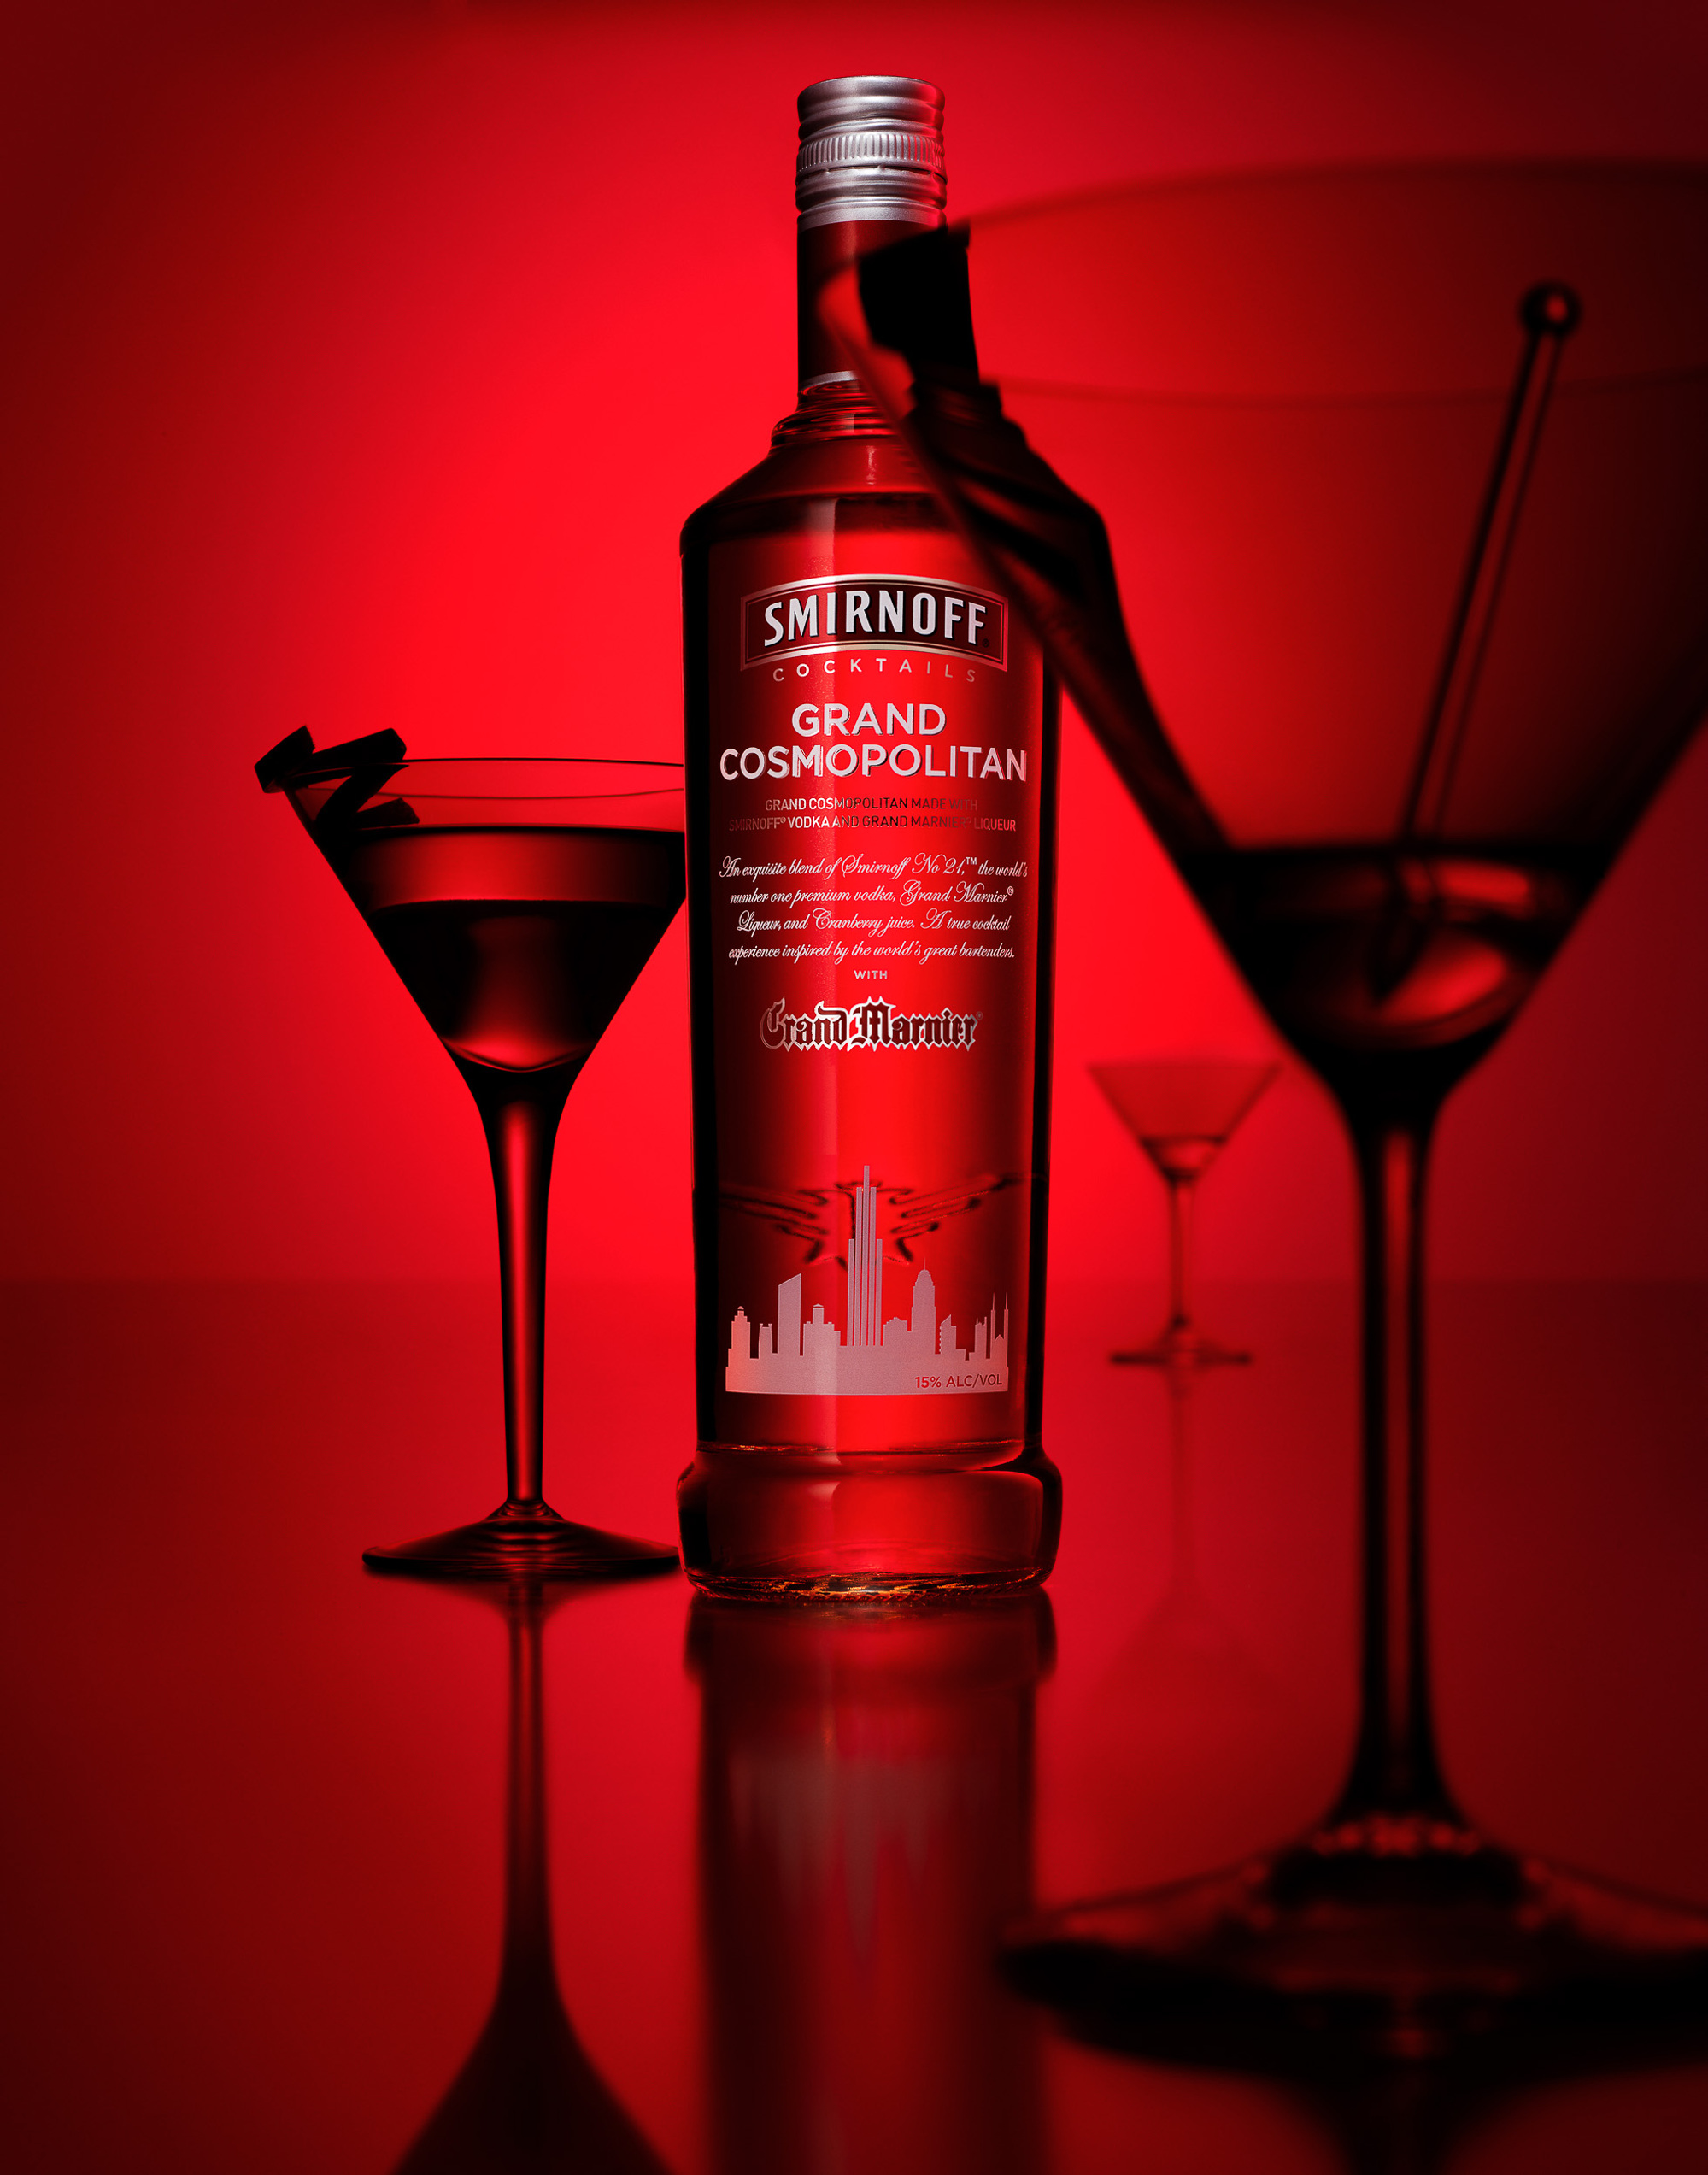 Smirnoff cosmopolitan cocktail by beverage and liquids photographer Timothy Hogan in Los Angeles